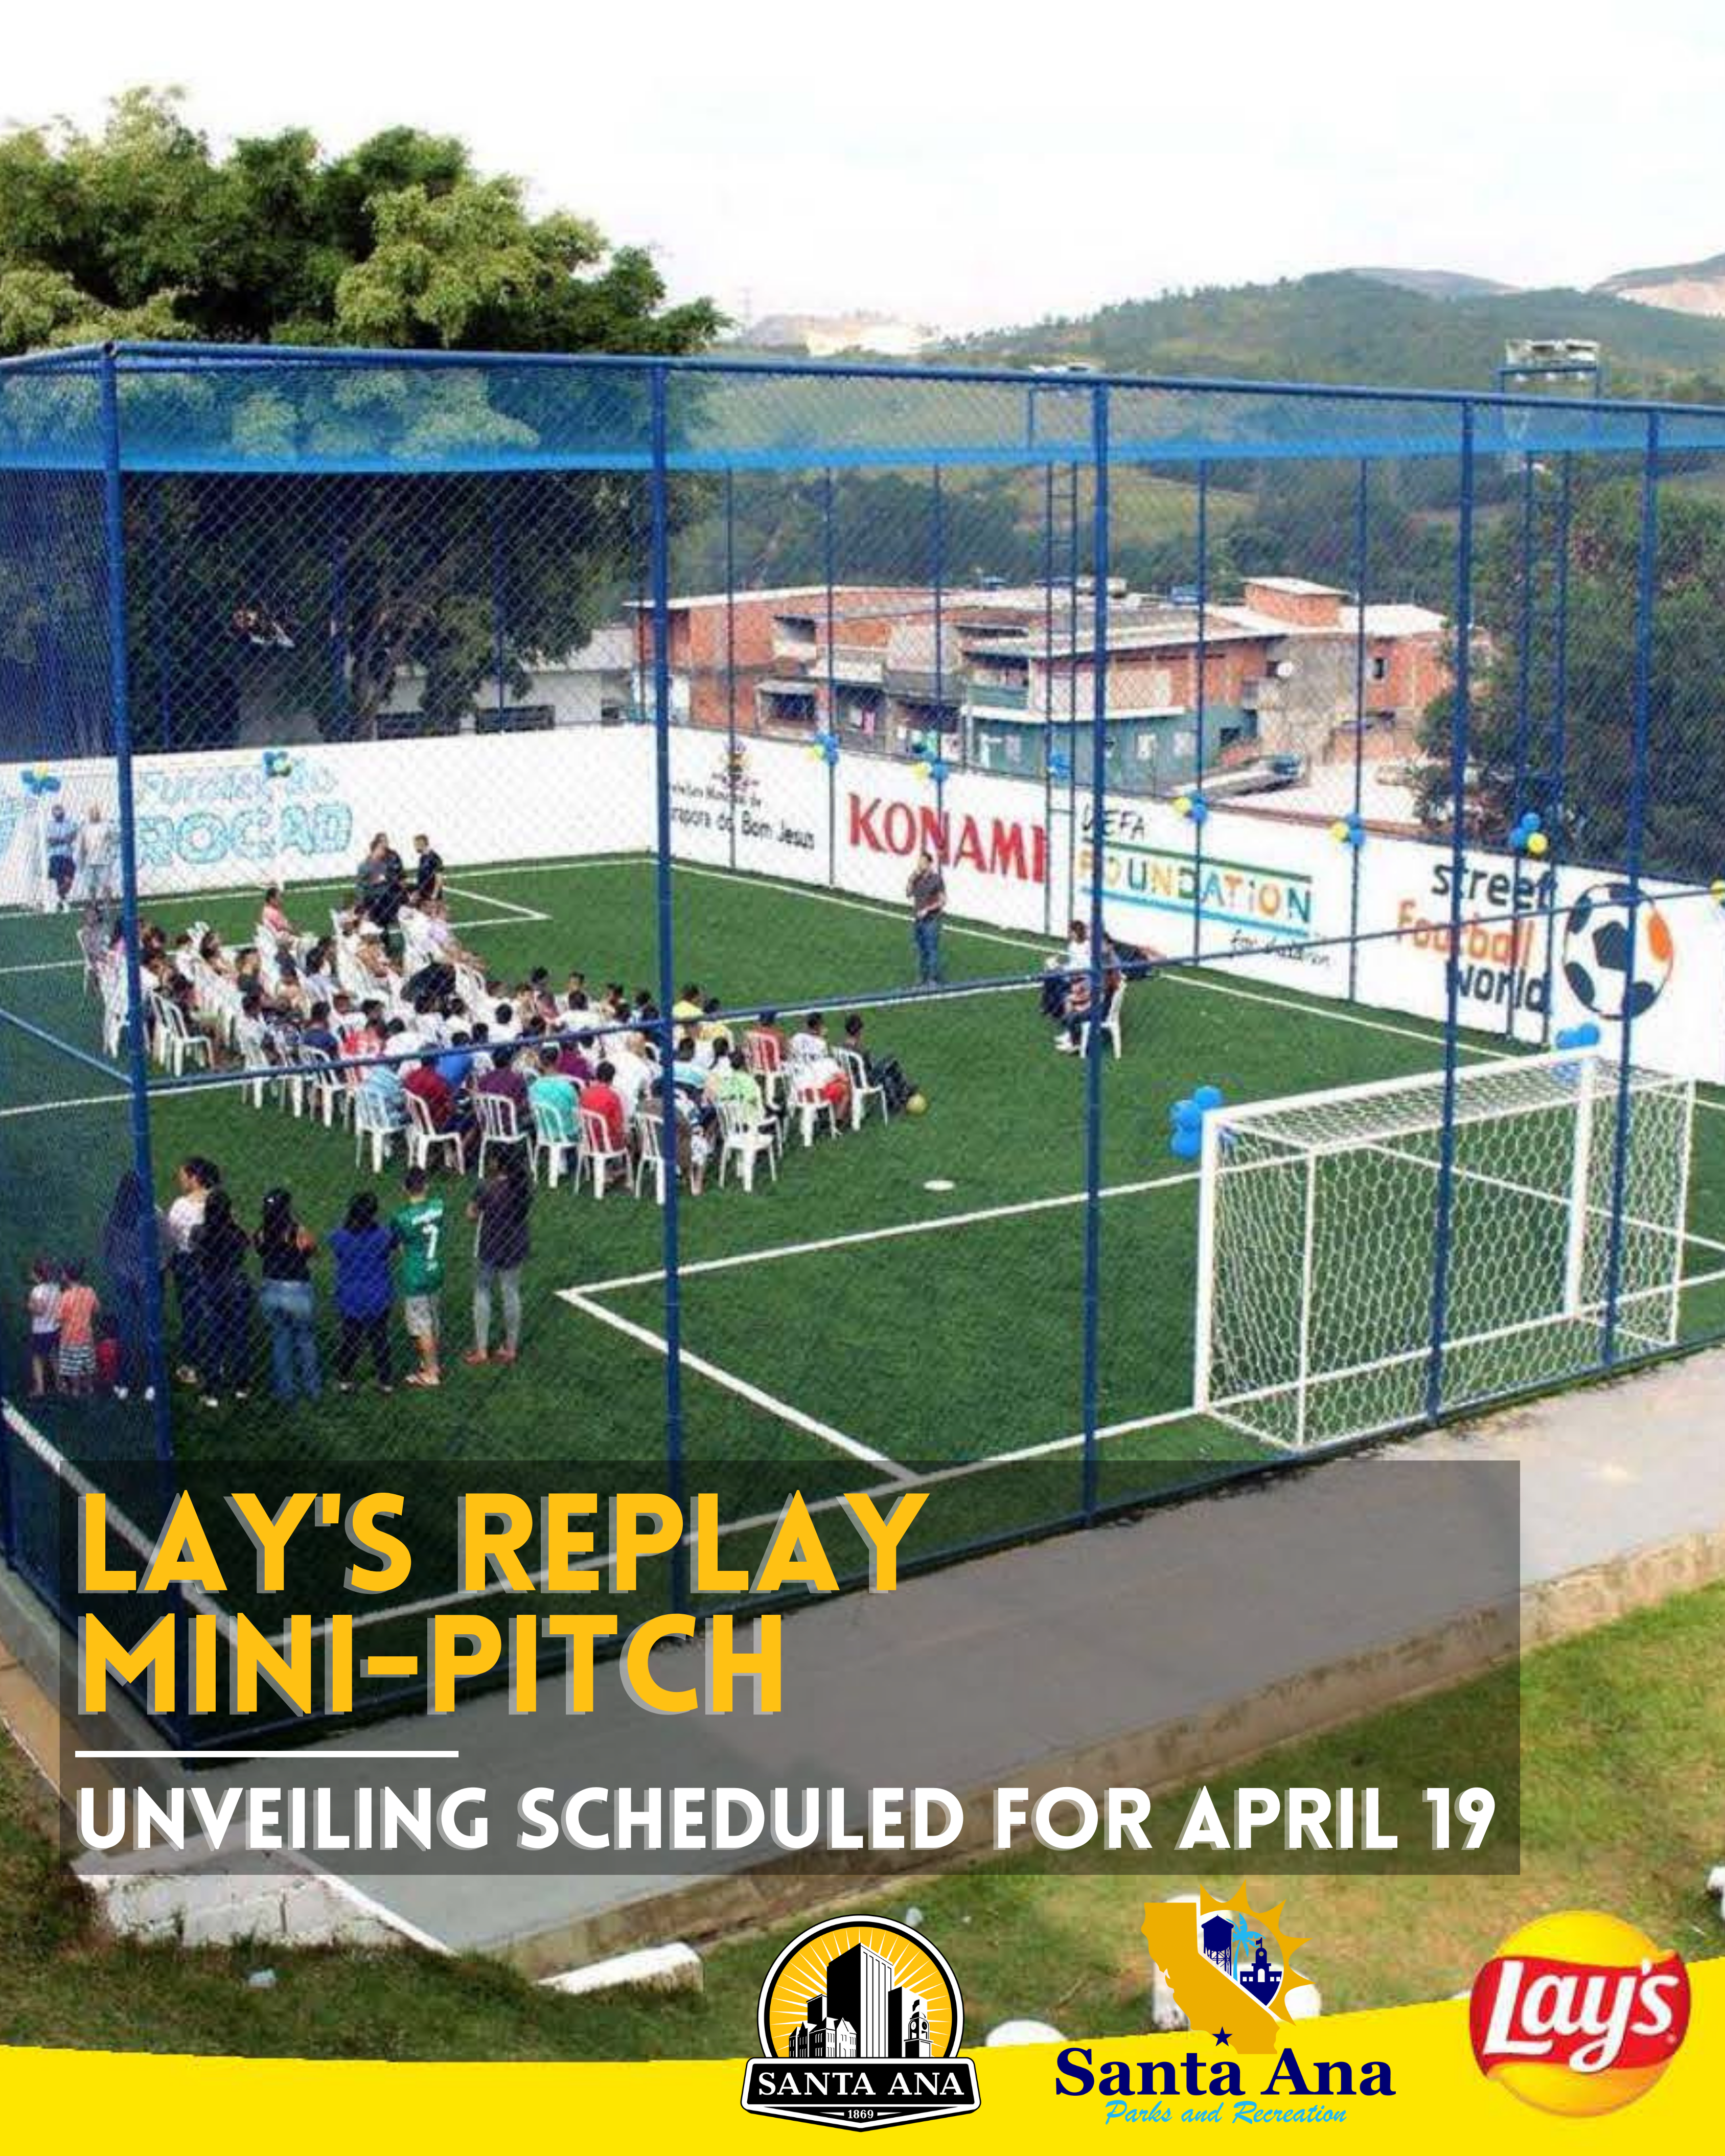 Image of Lay's RePlay Mini-Pitch coming soon to Cesar Chavez Campesino Park